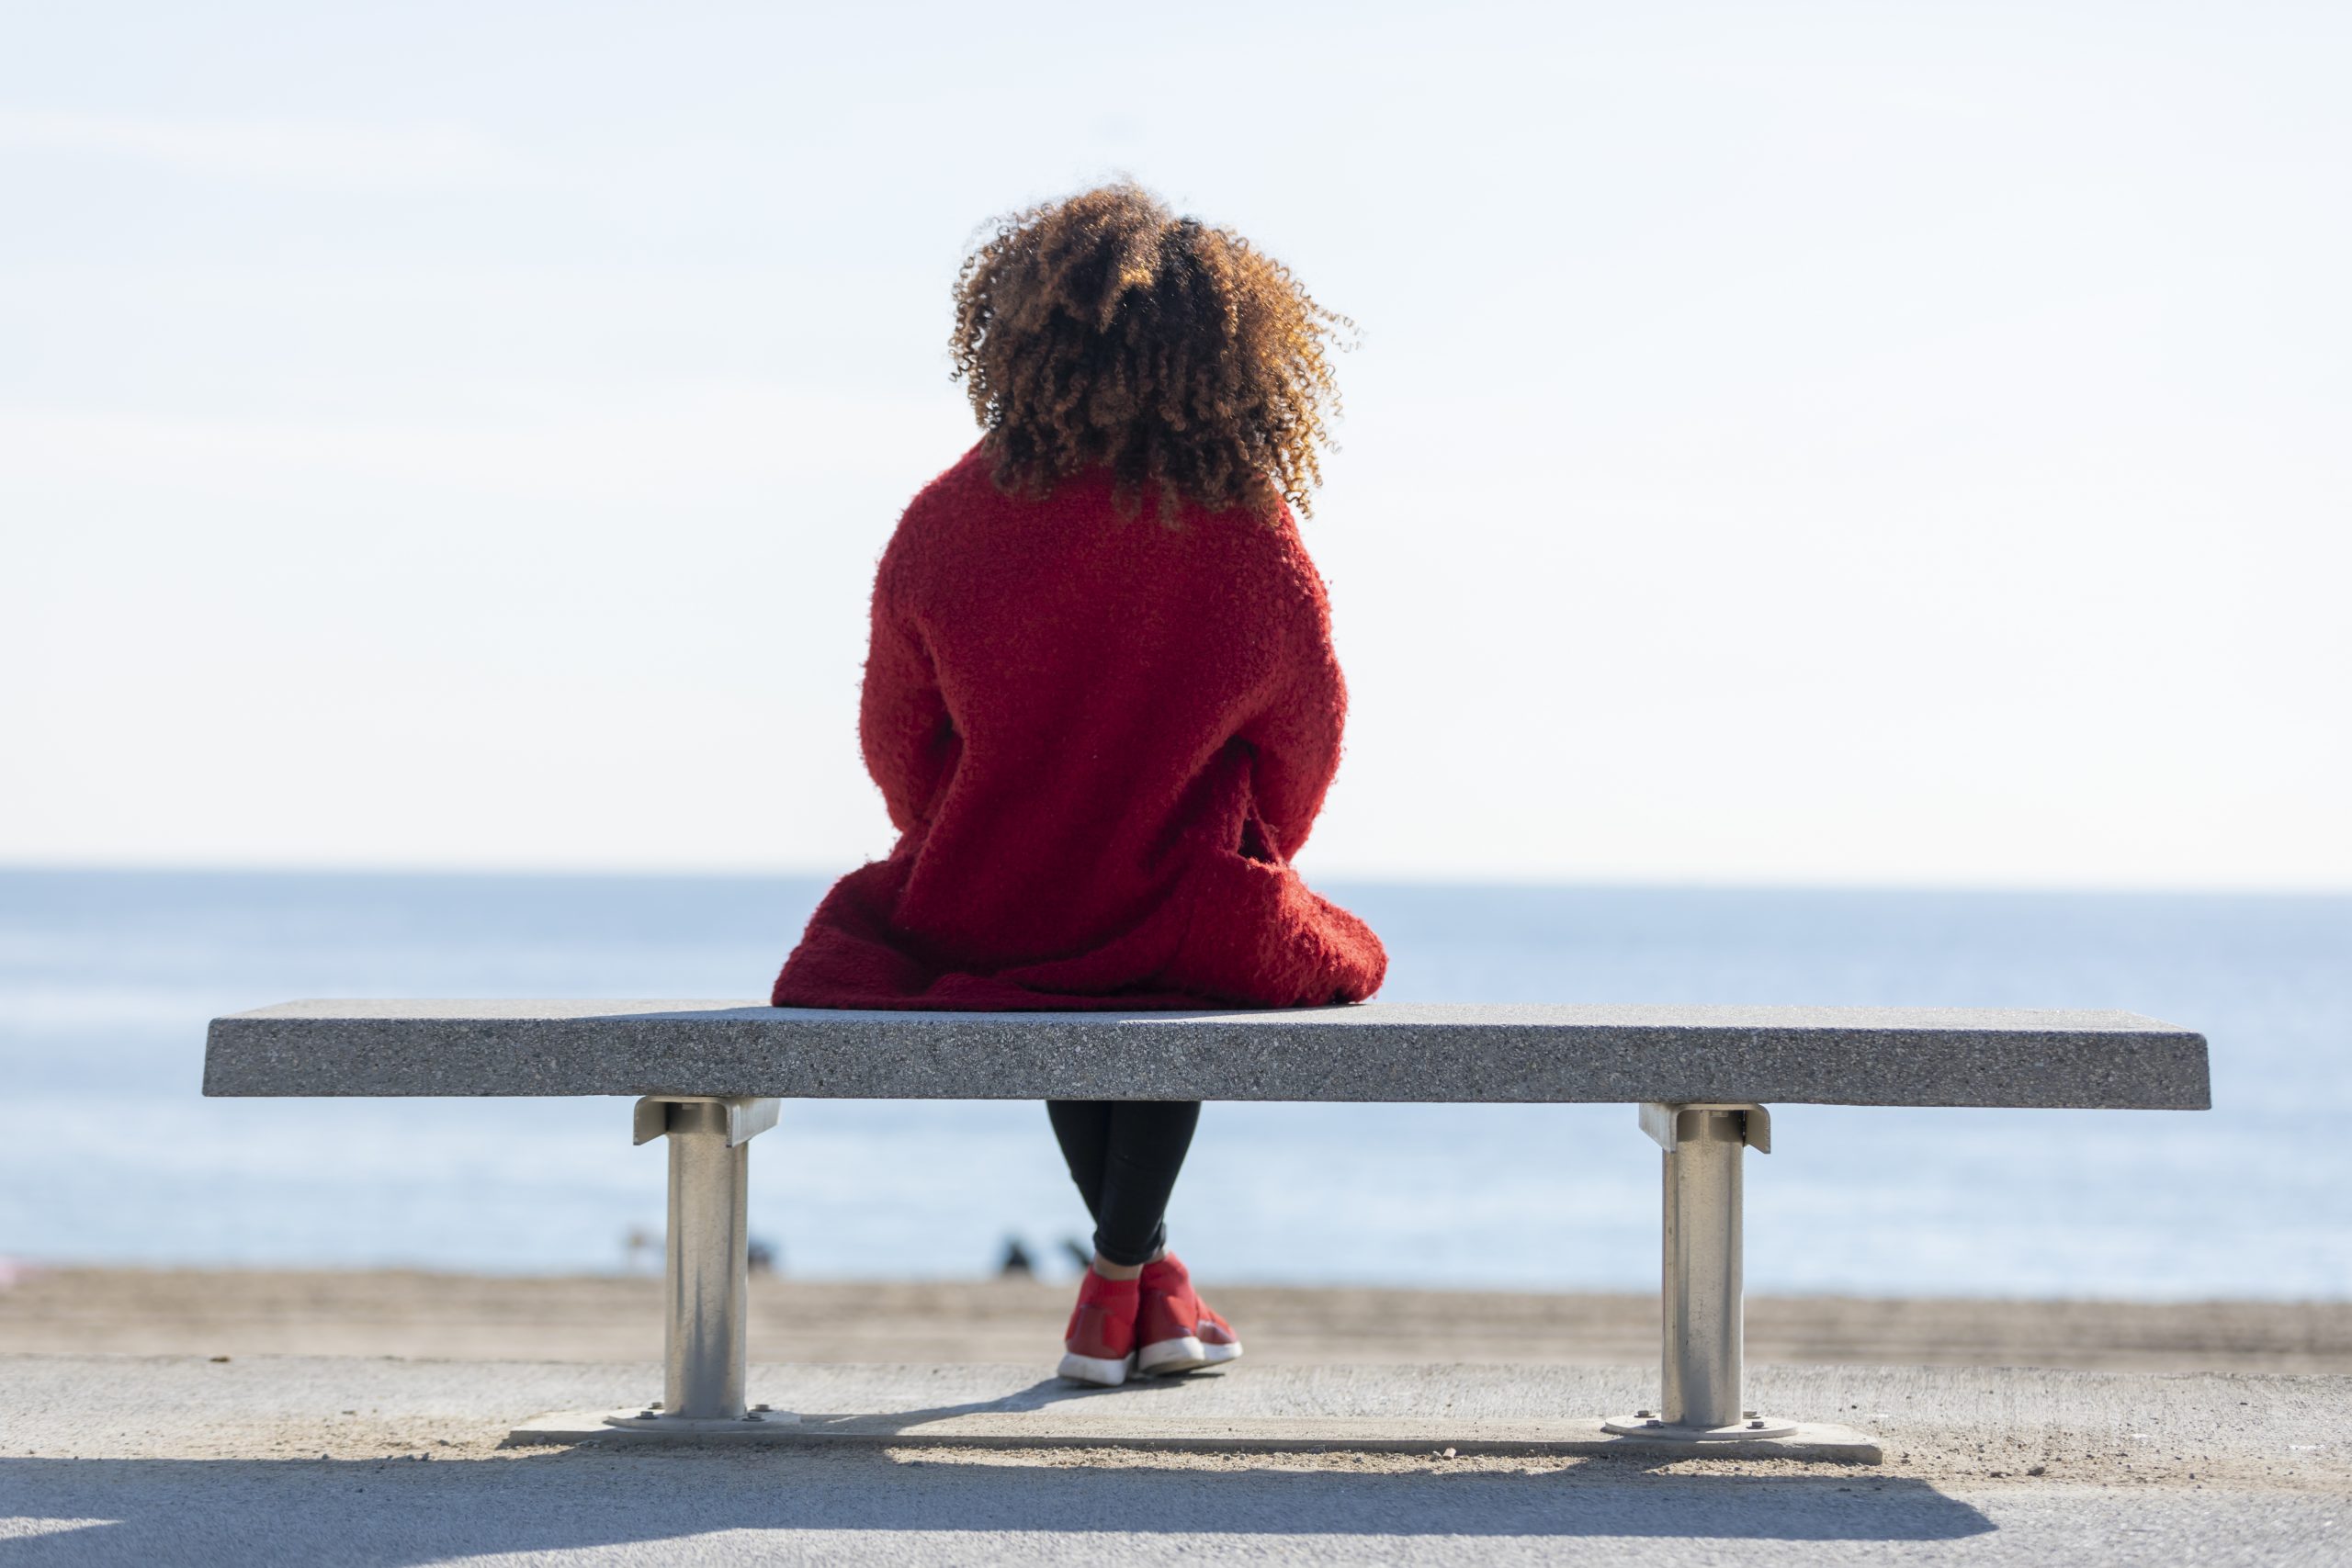 Thoughtful woman contemplating pregnancy options while sitting on a bench by a serene beach, reflecting on choices like abortion, adoption, or parenting.